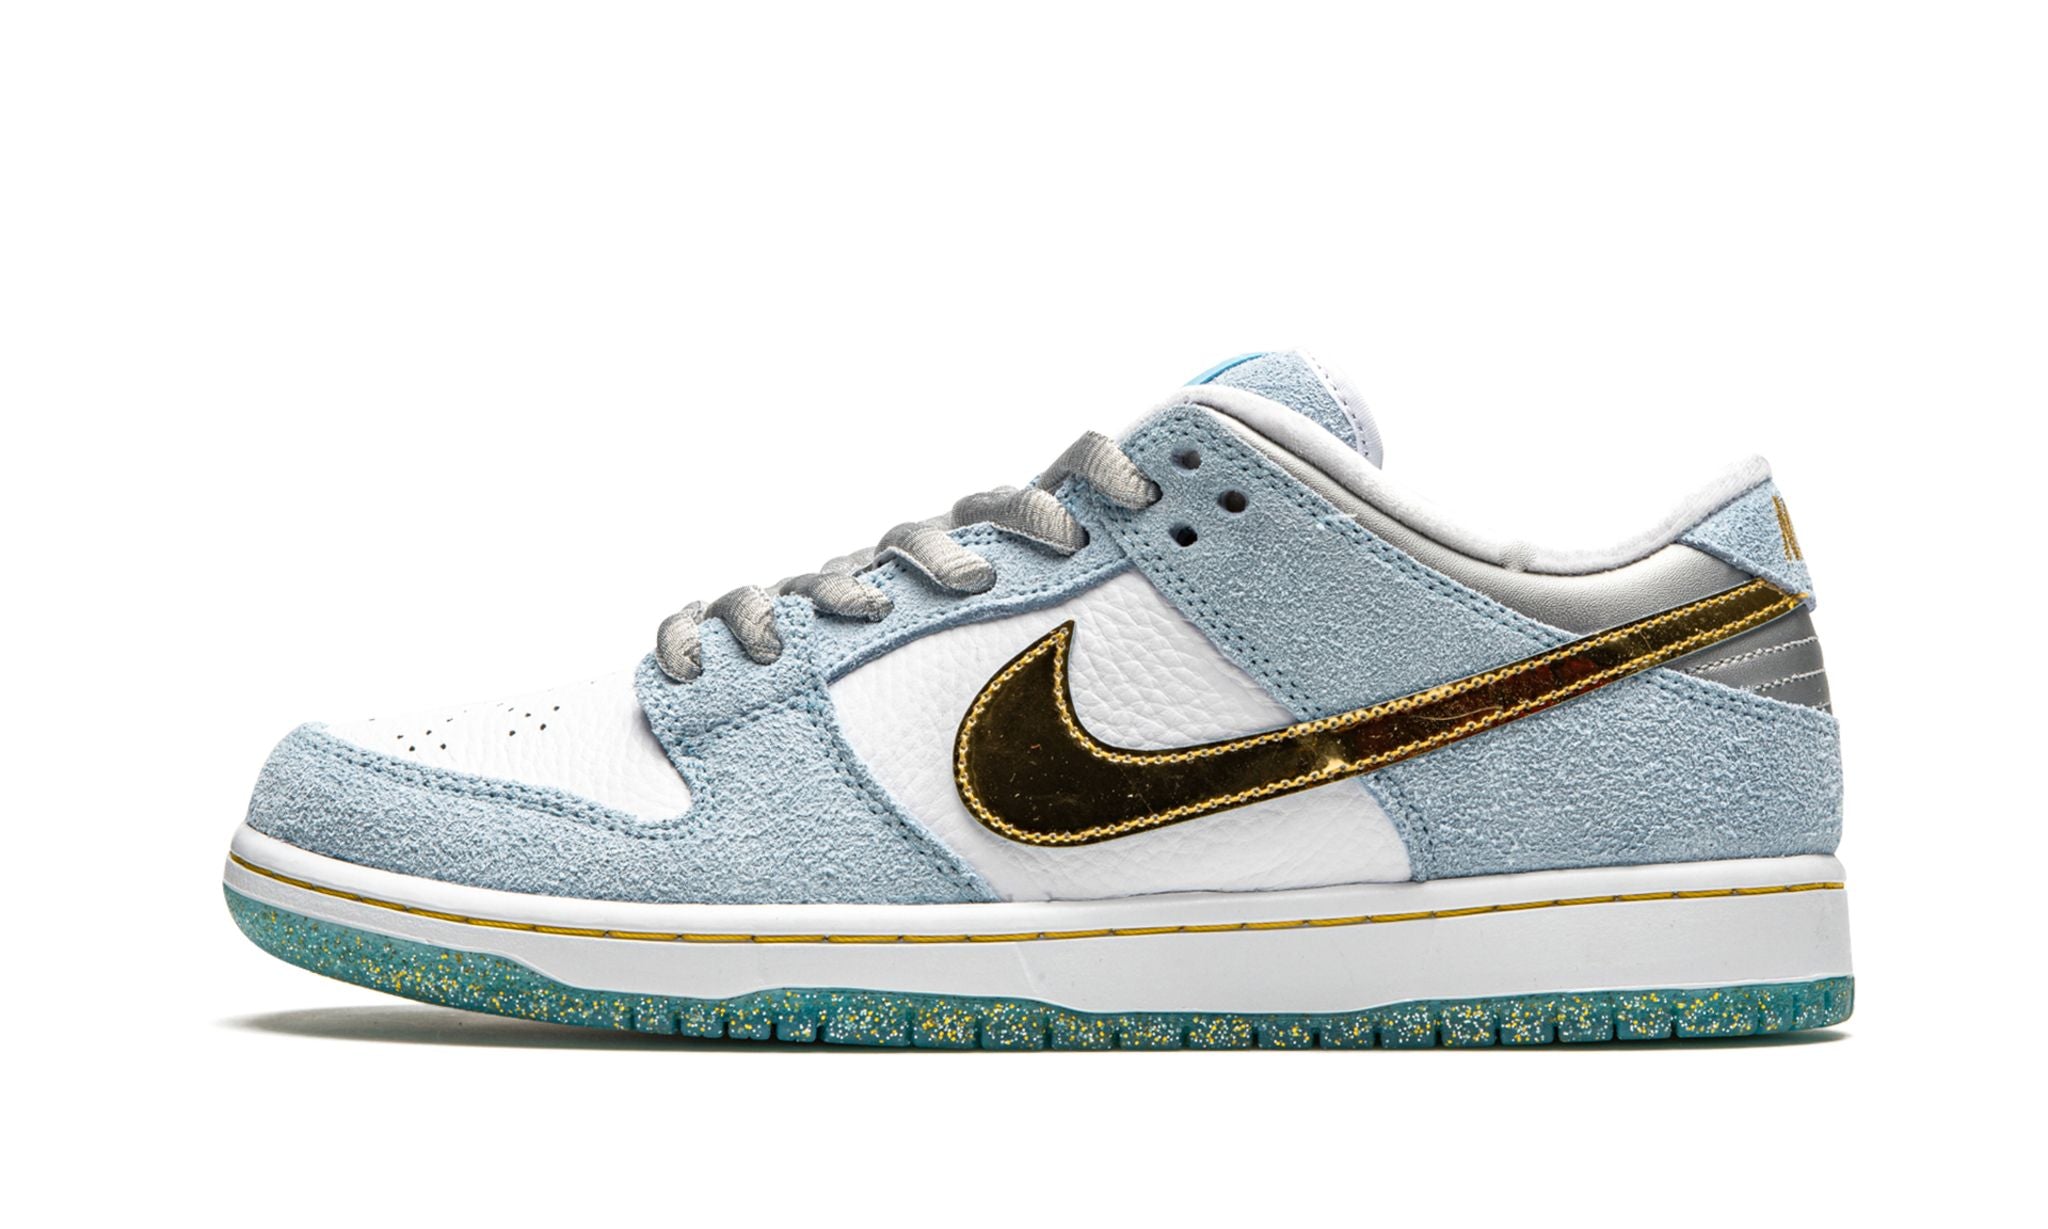 SB DUNK LOW "Sean Cliver - Holiday Special"